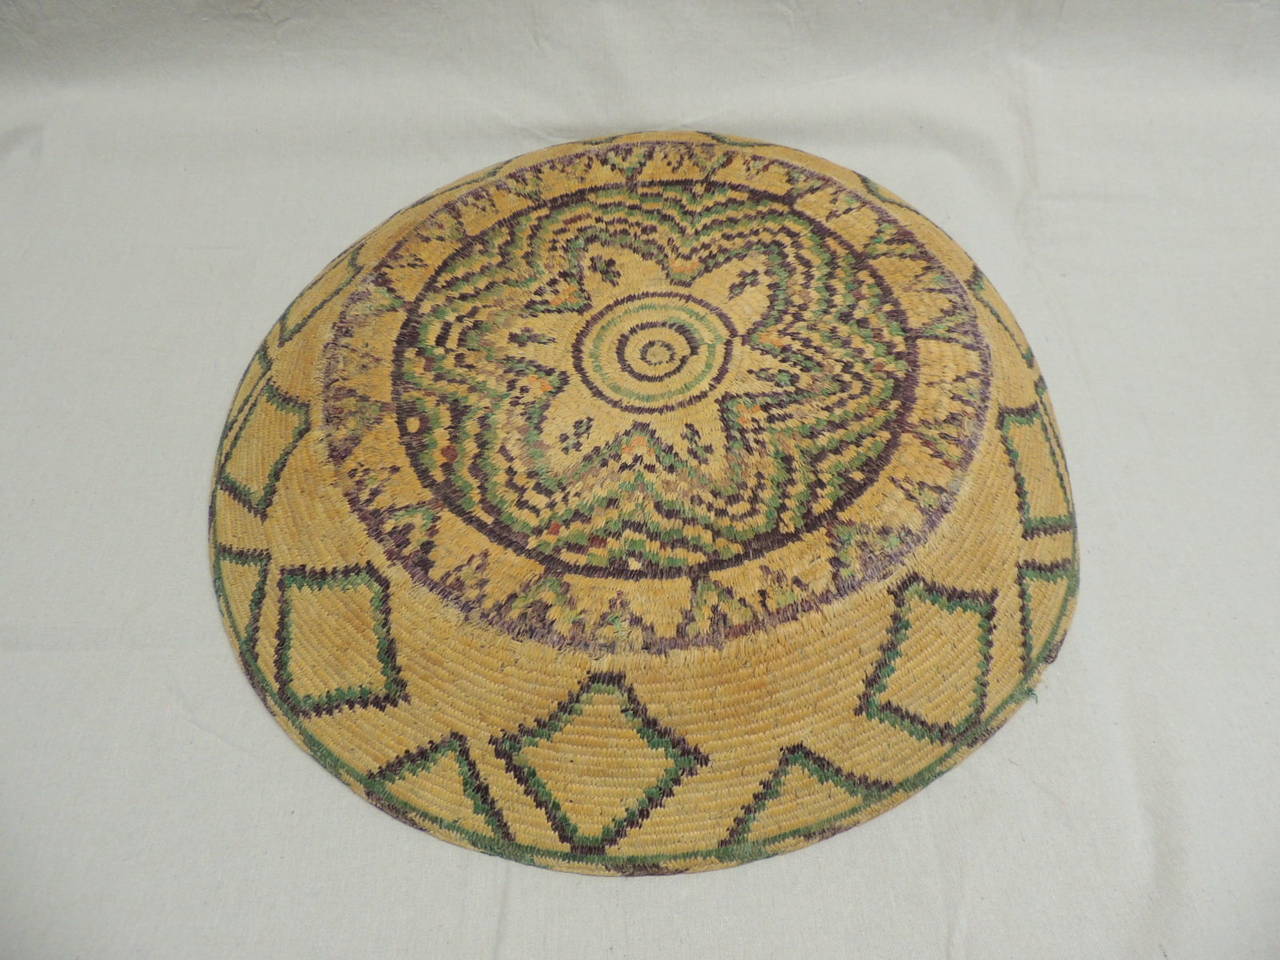 Hand-Woven Large Round Artisanal Basket with Geometric Tribal Design